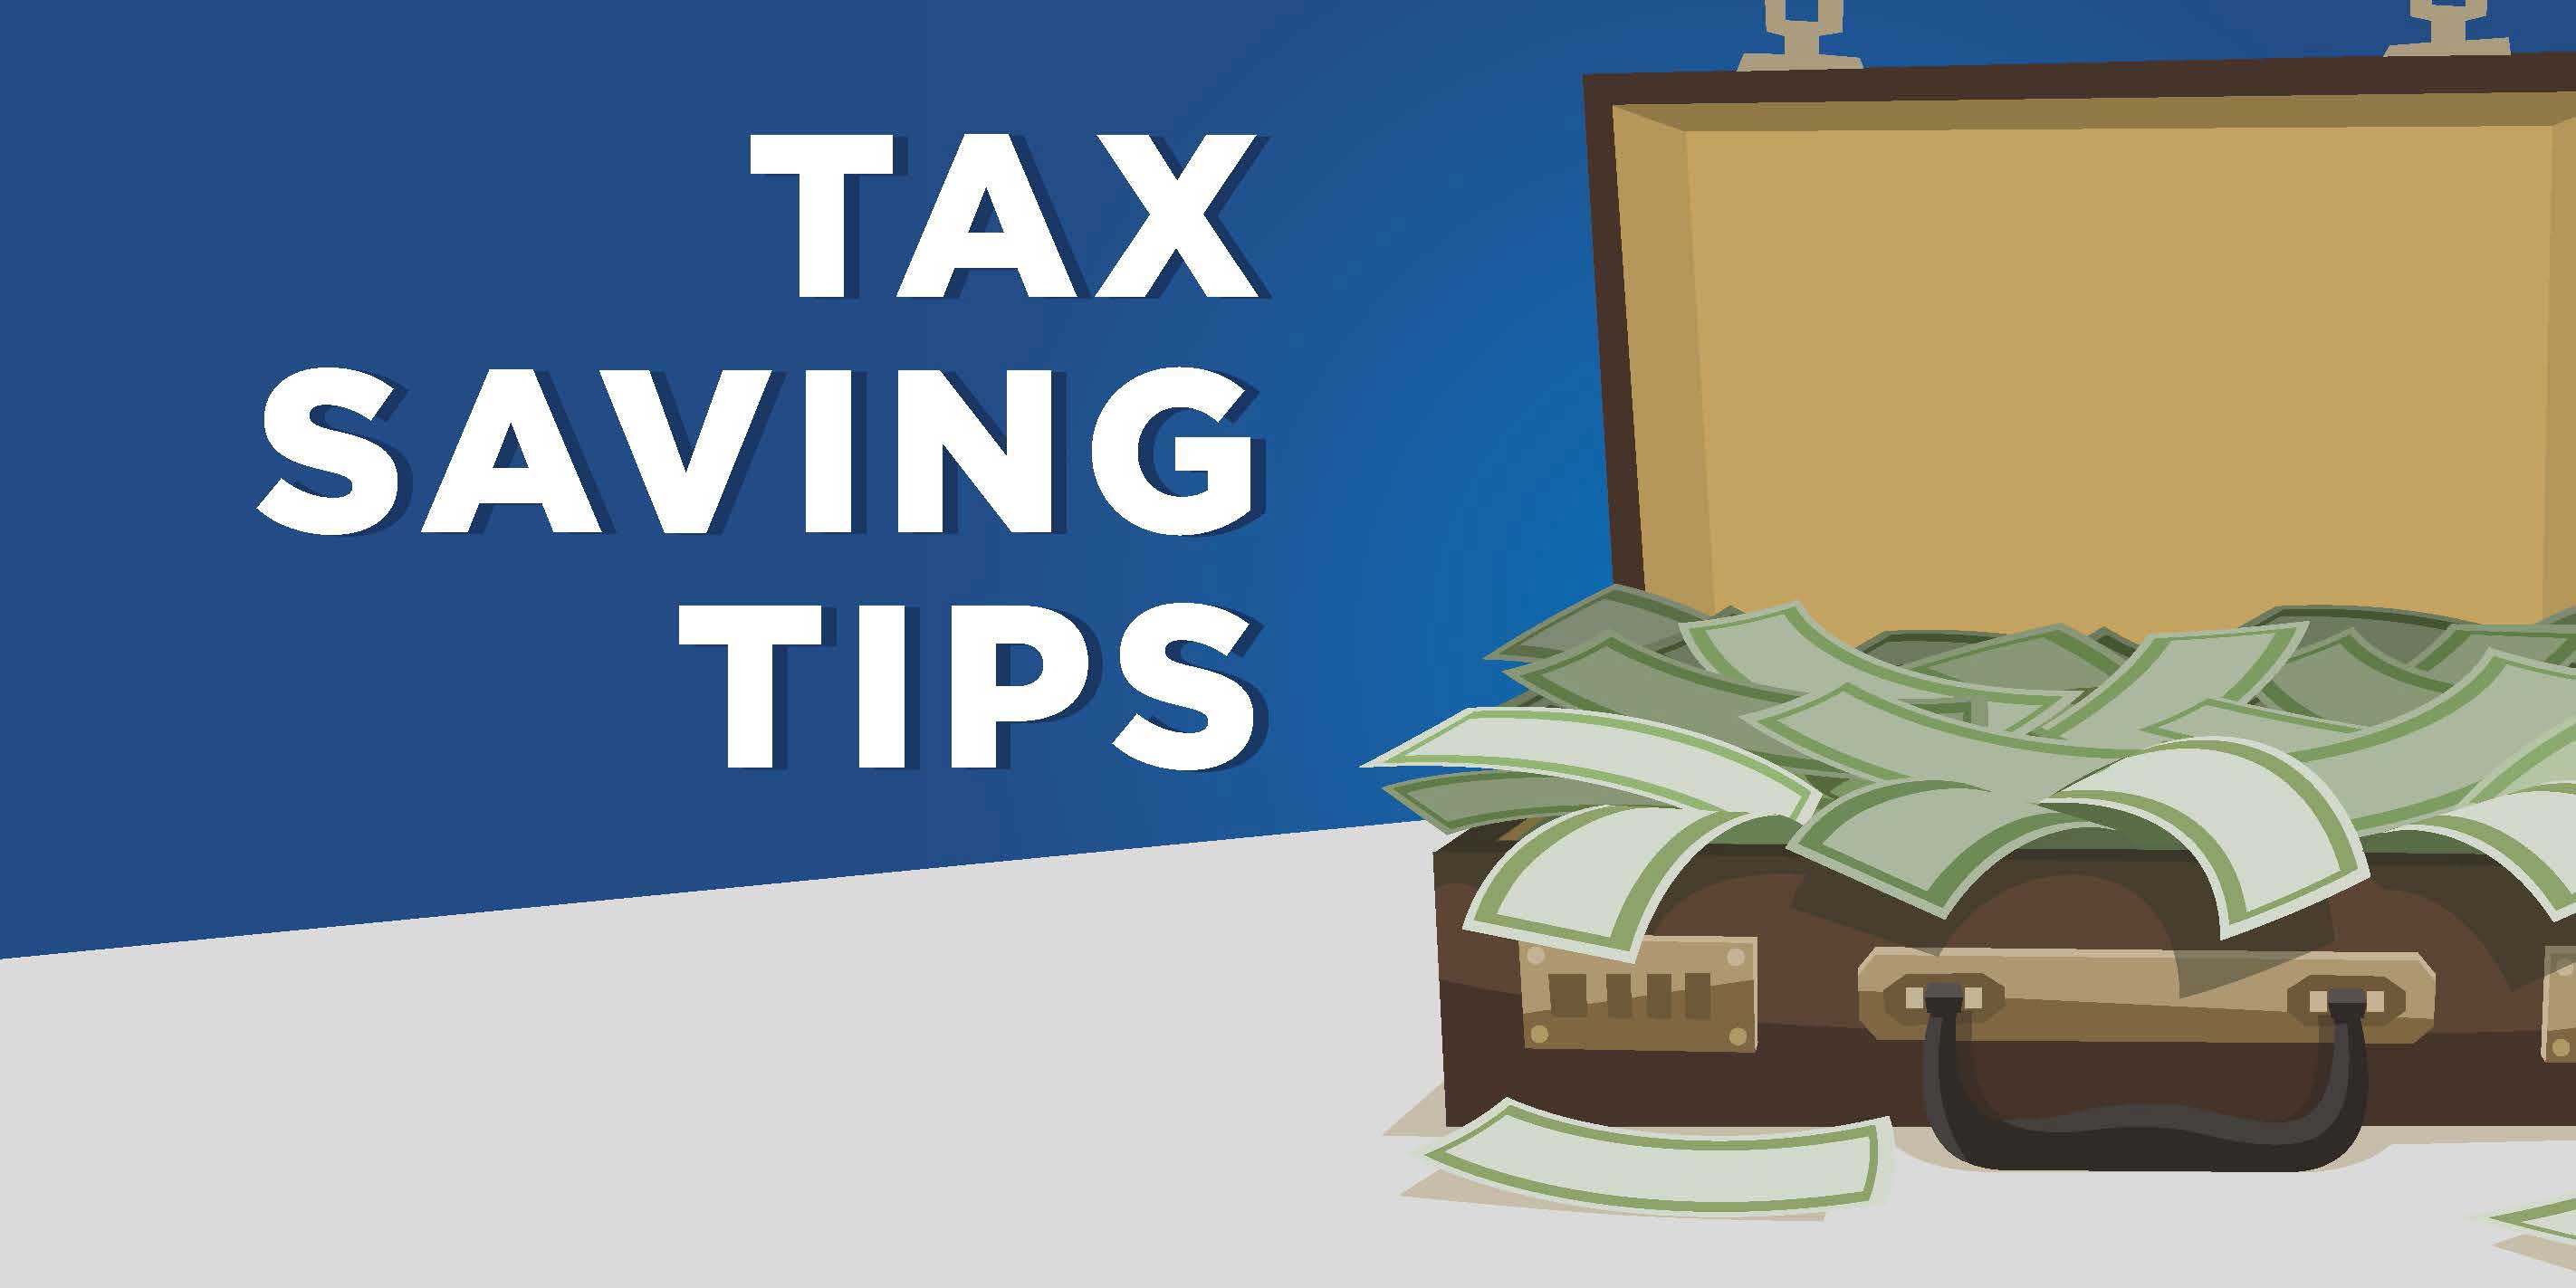 Tip to save tax who has net income of over £100,000